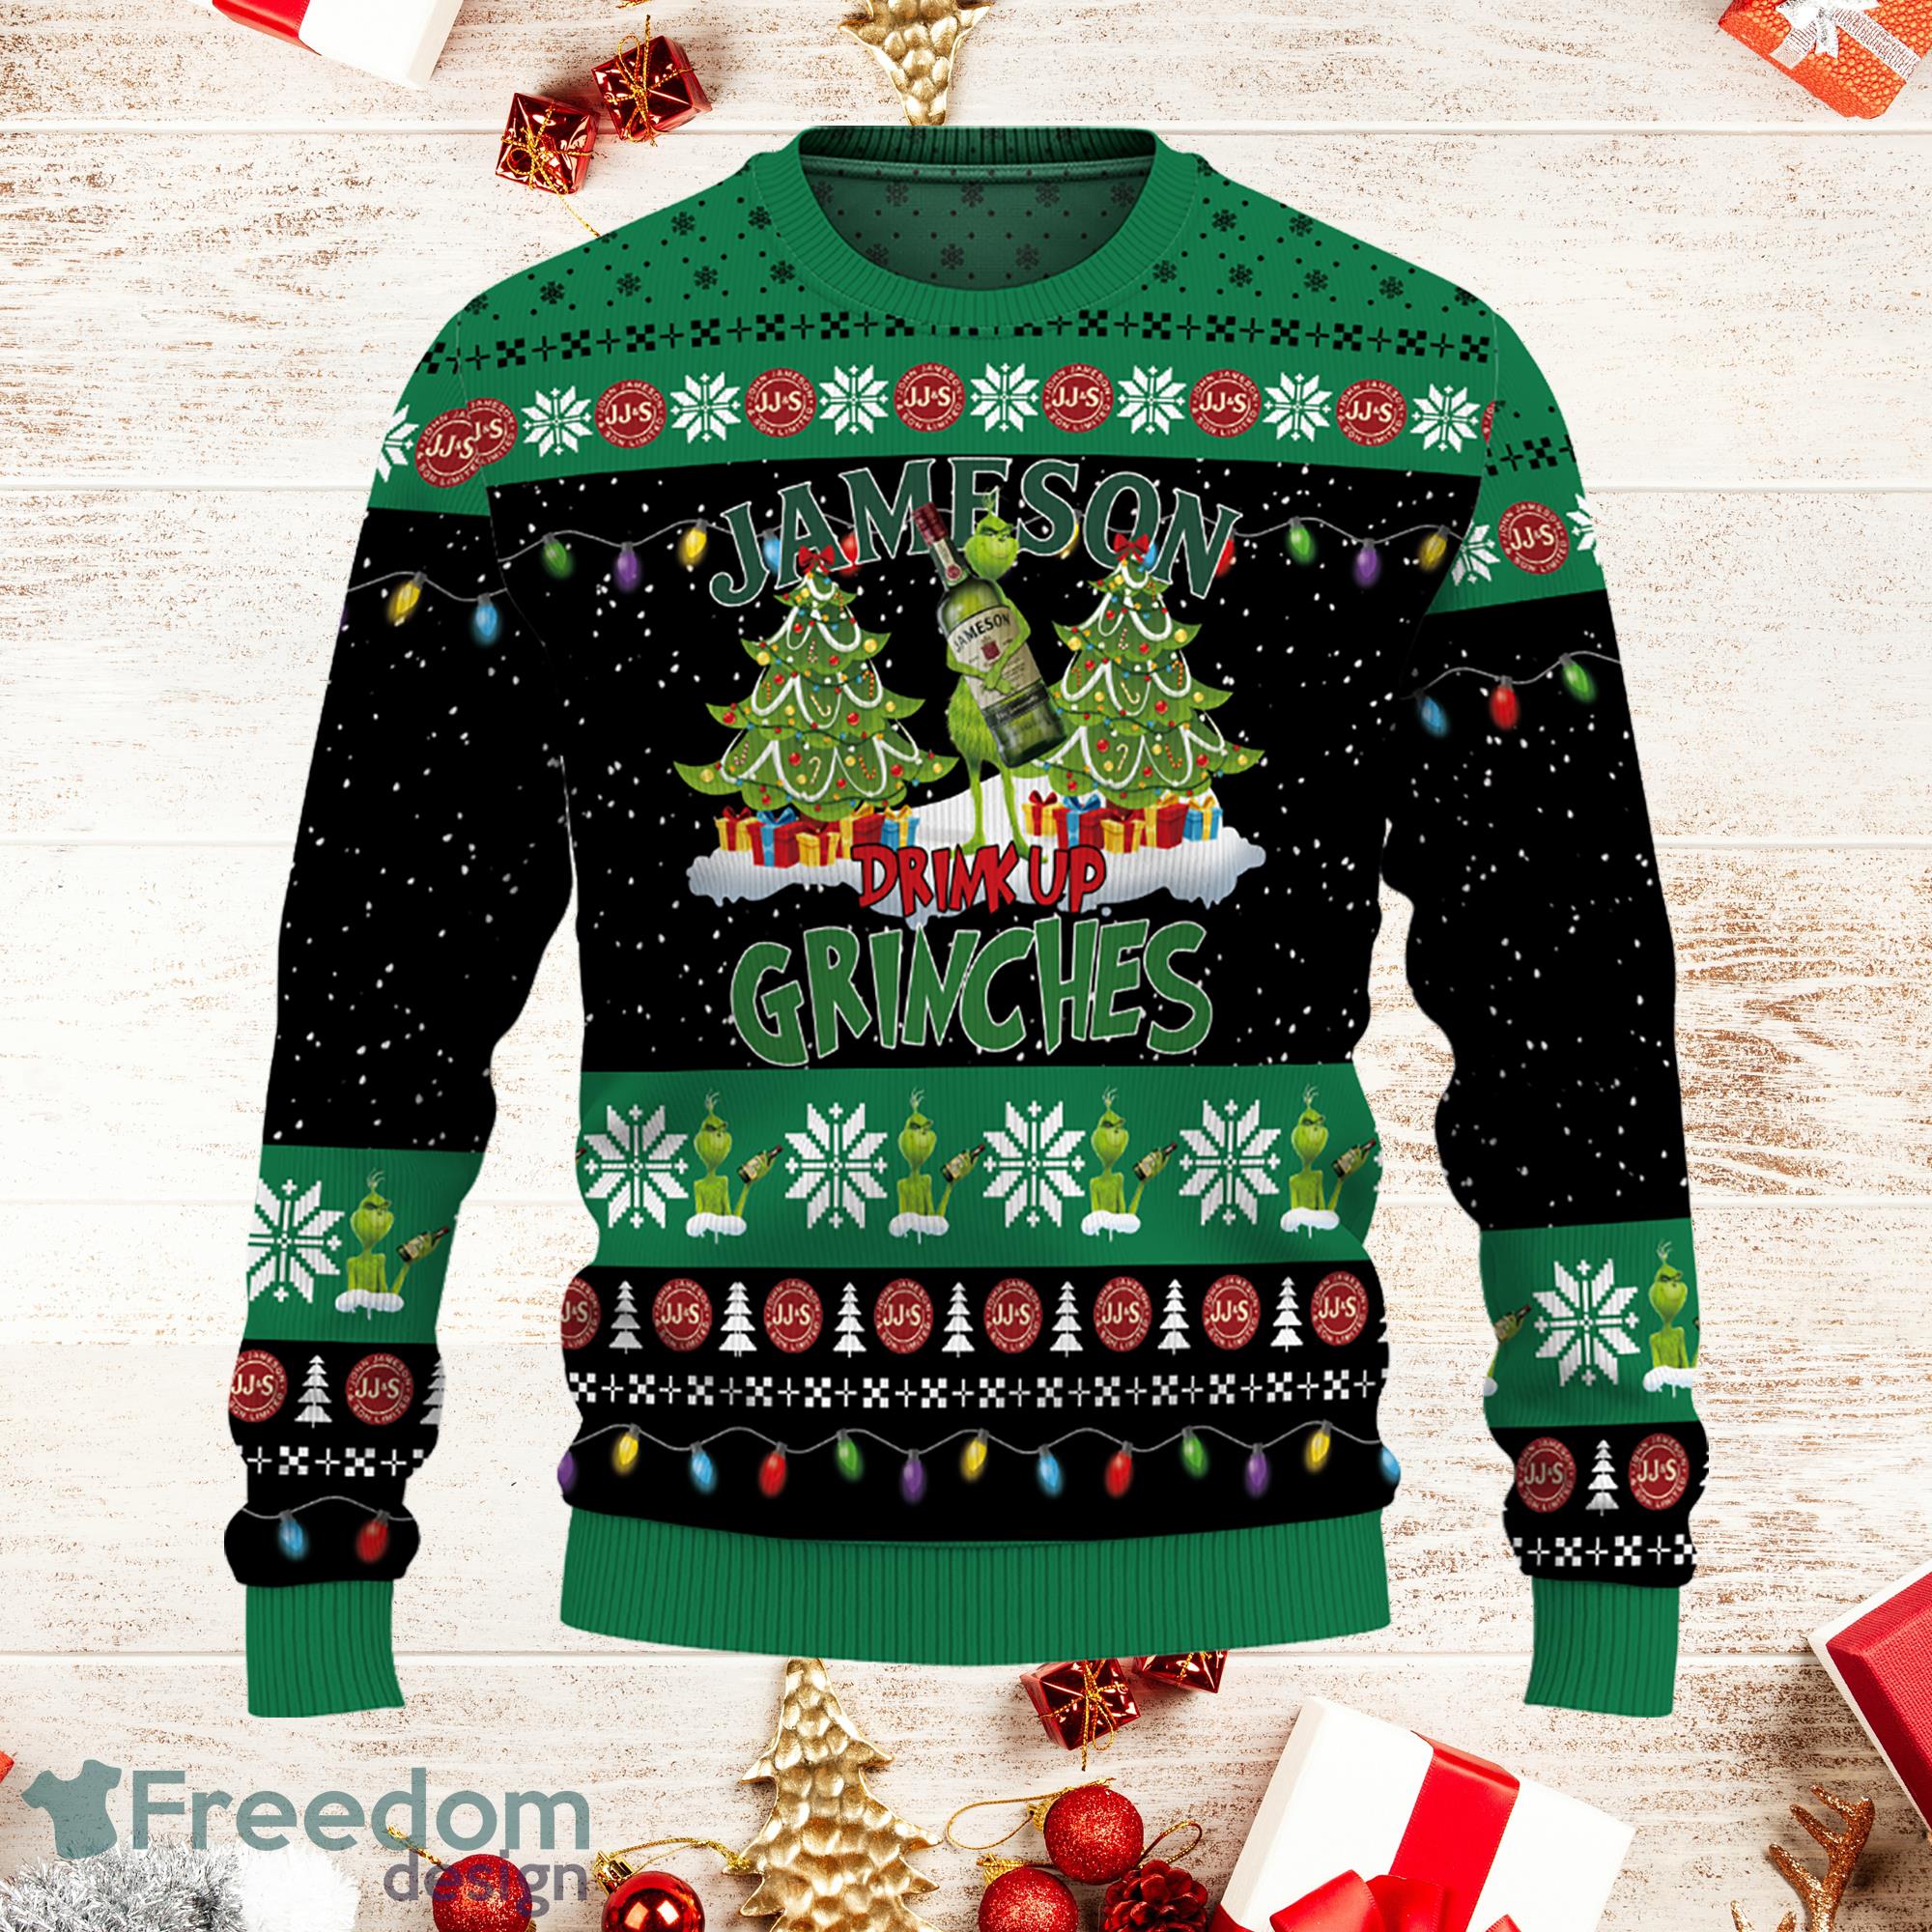 Jameson Drink Up Grinches Full Print Ugly Christmas Sweater